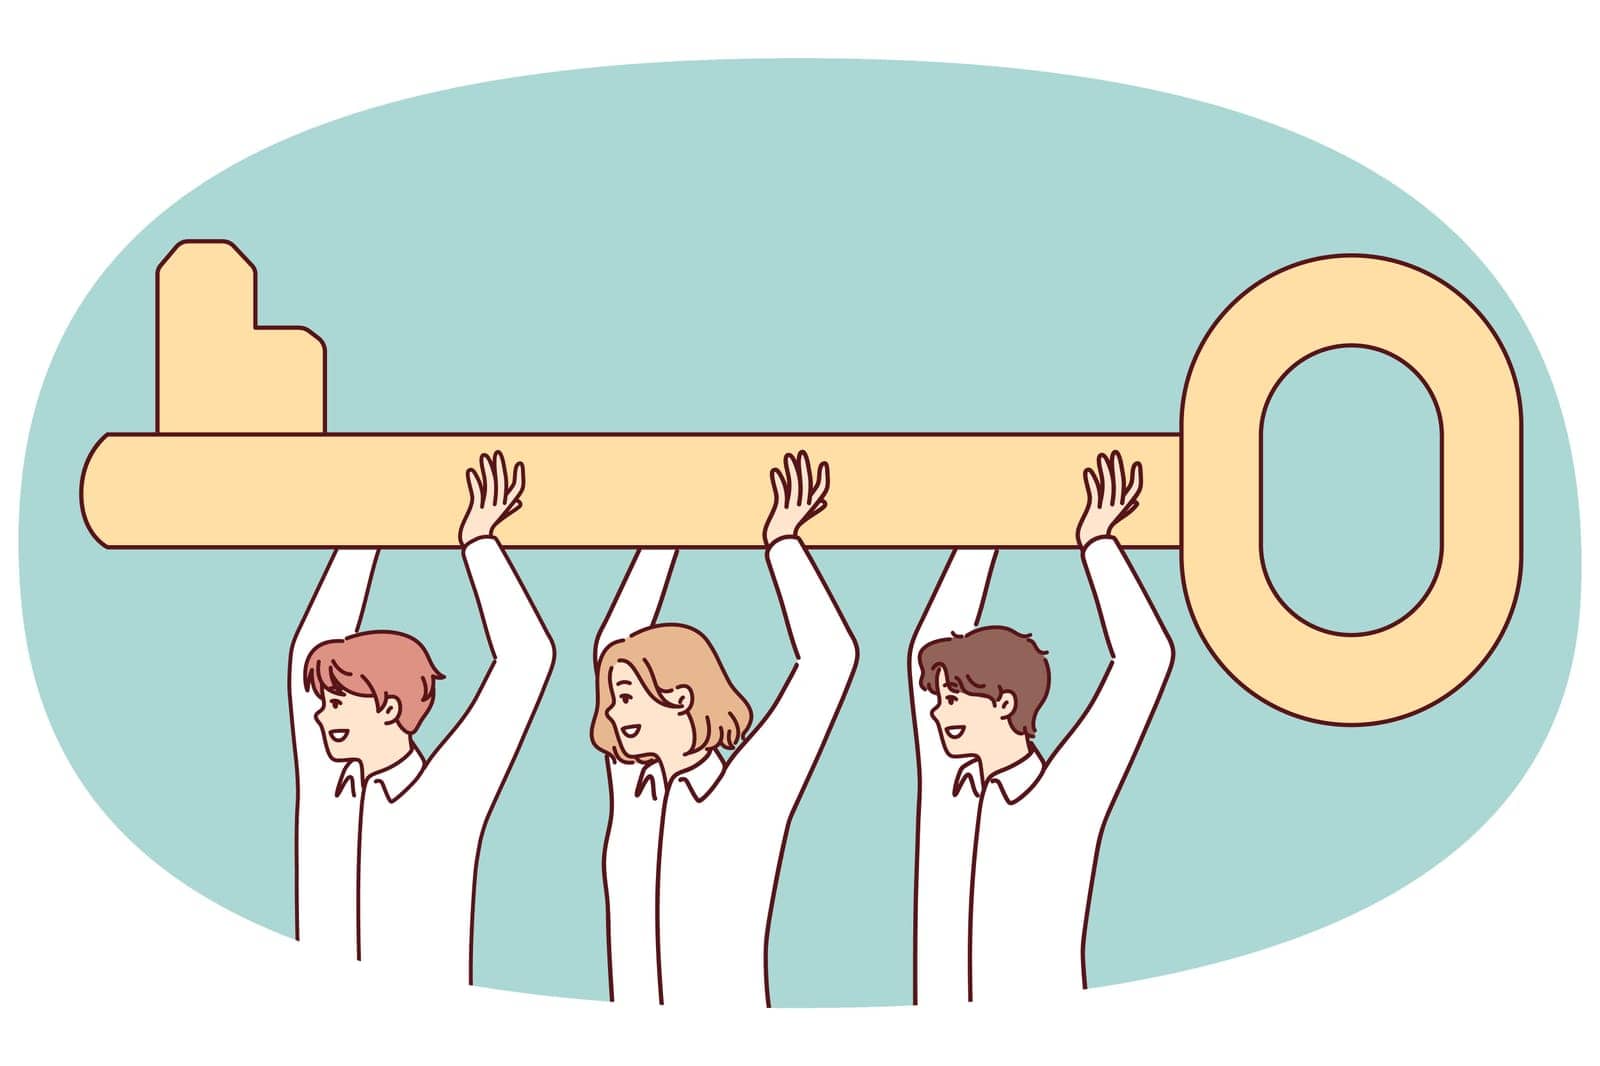 Team workers raises huge key above their heads, symbolizing joint solution of problem. Friendly men and woman work together to improve business processes to achieve company goals. Flat vector image